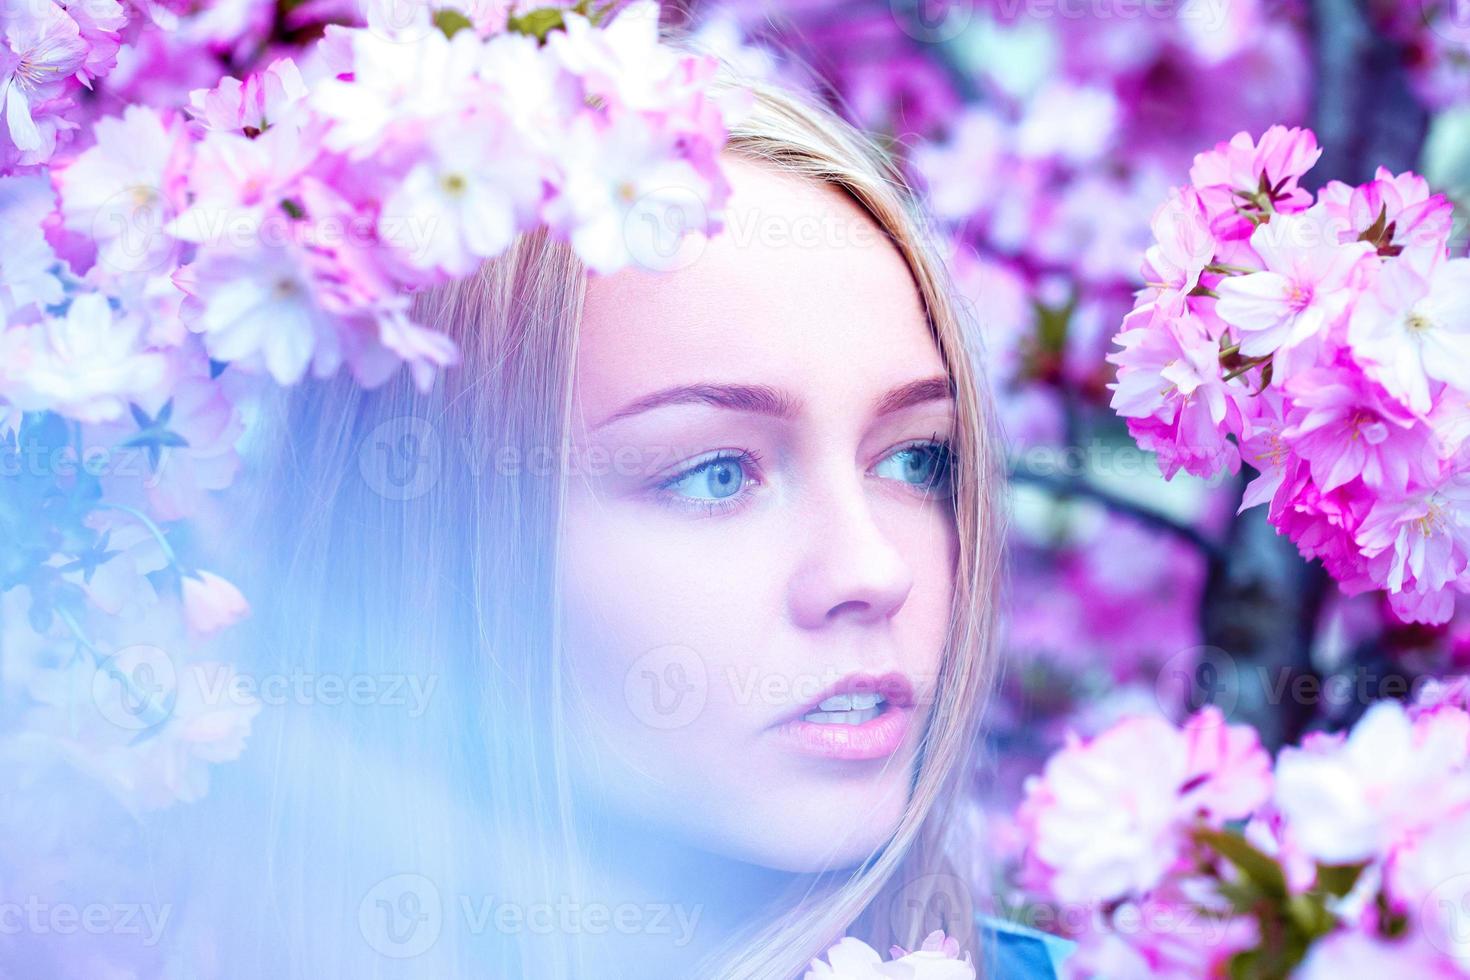 Horizontal portrait of adorable young blonde in blooming flowers photo